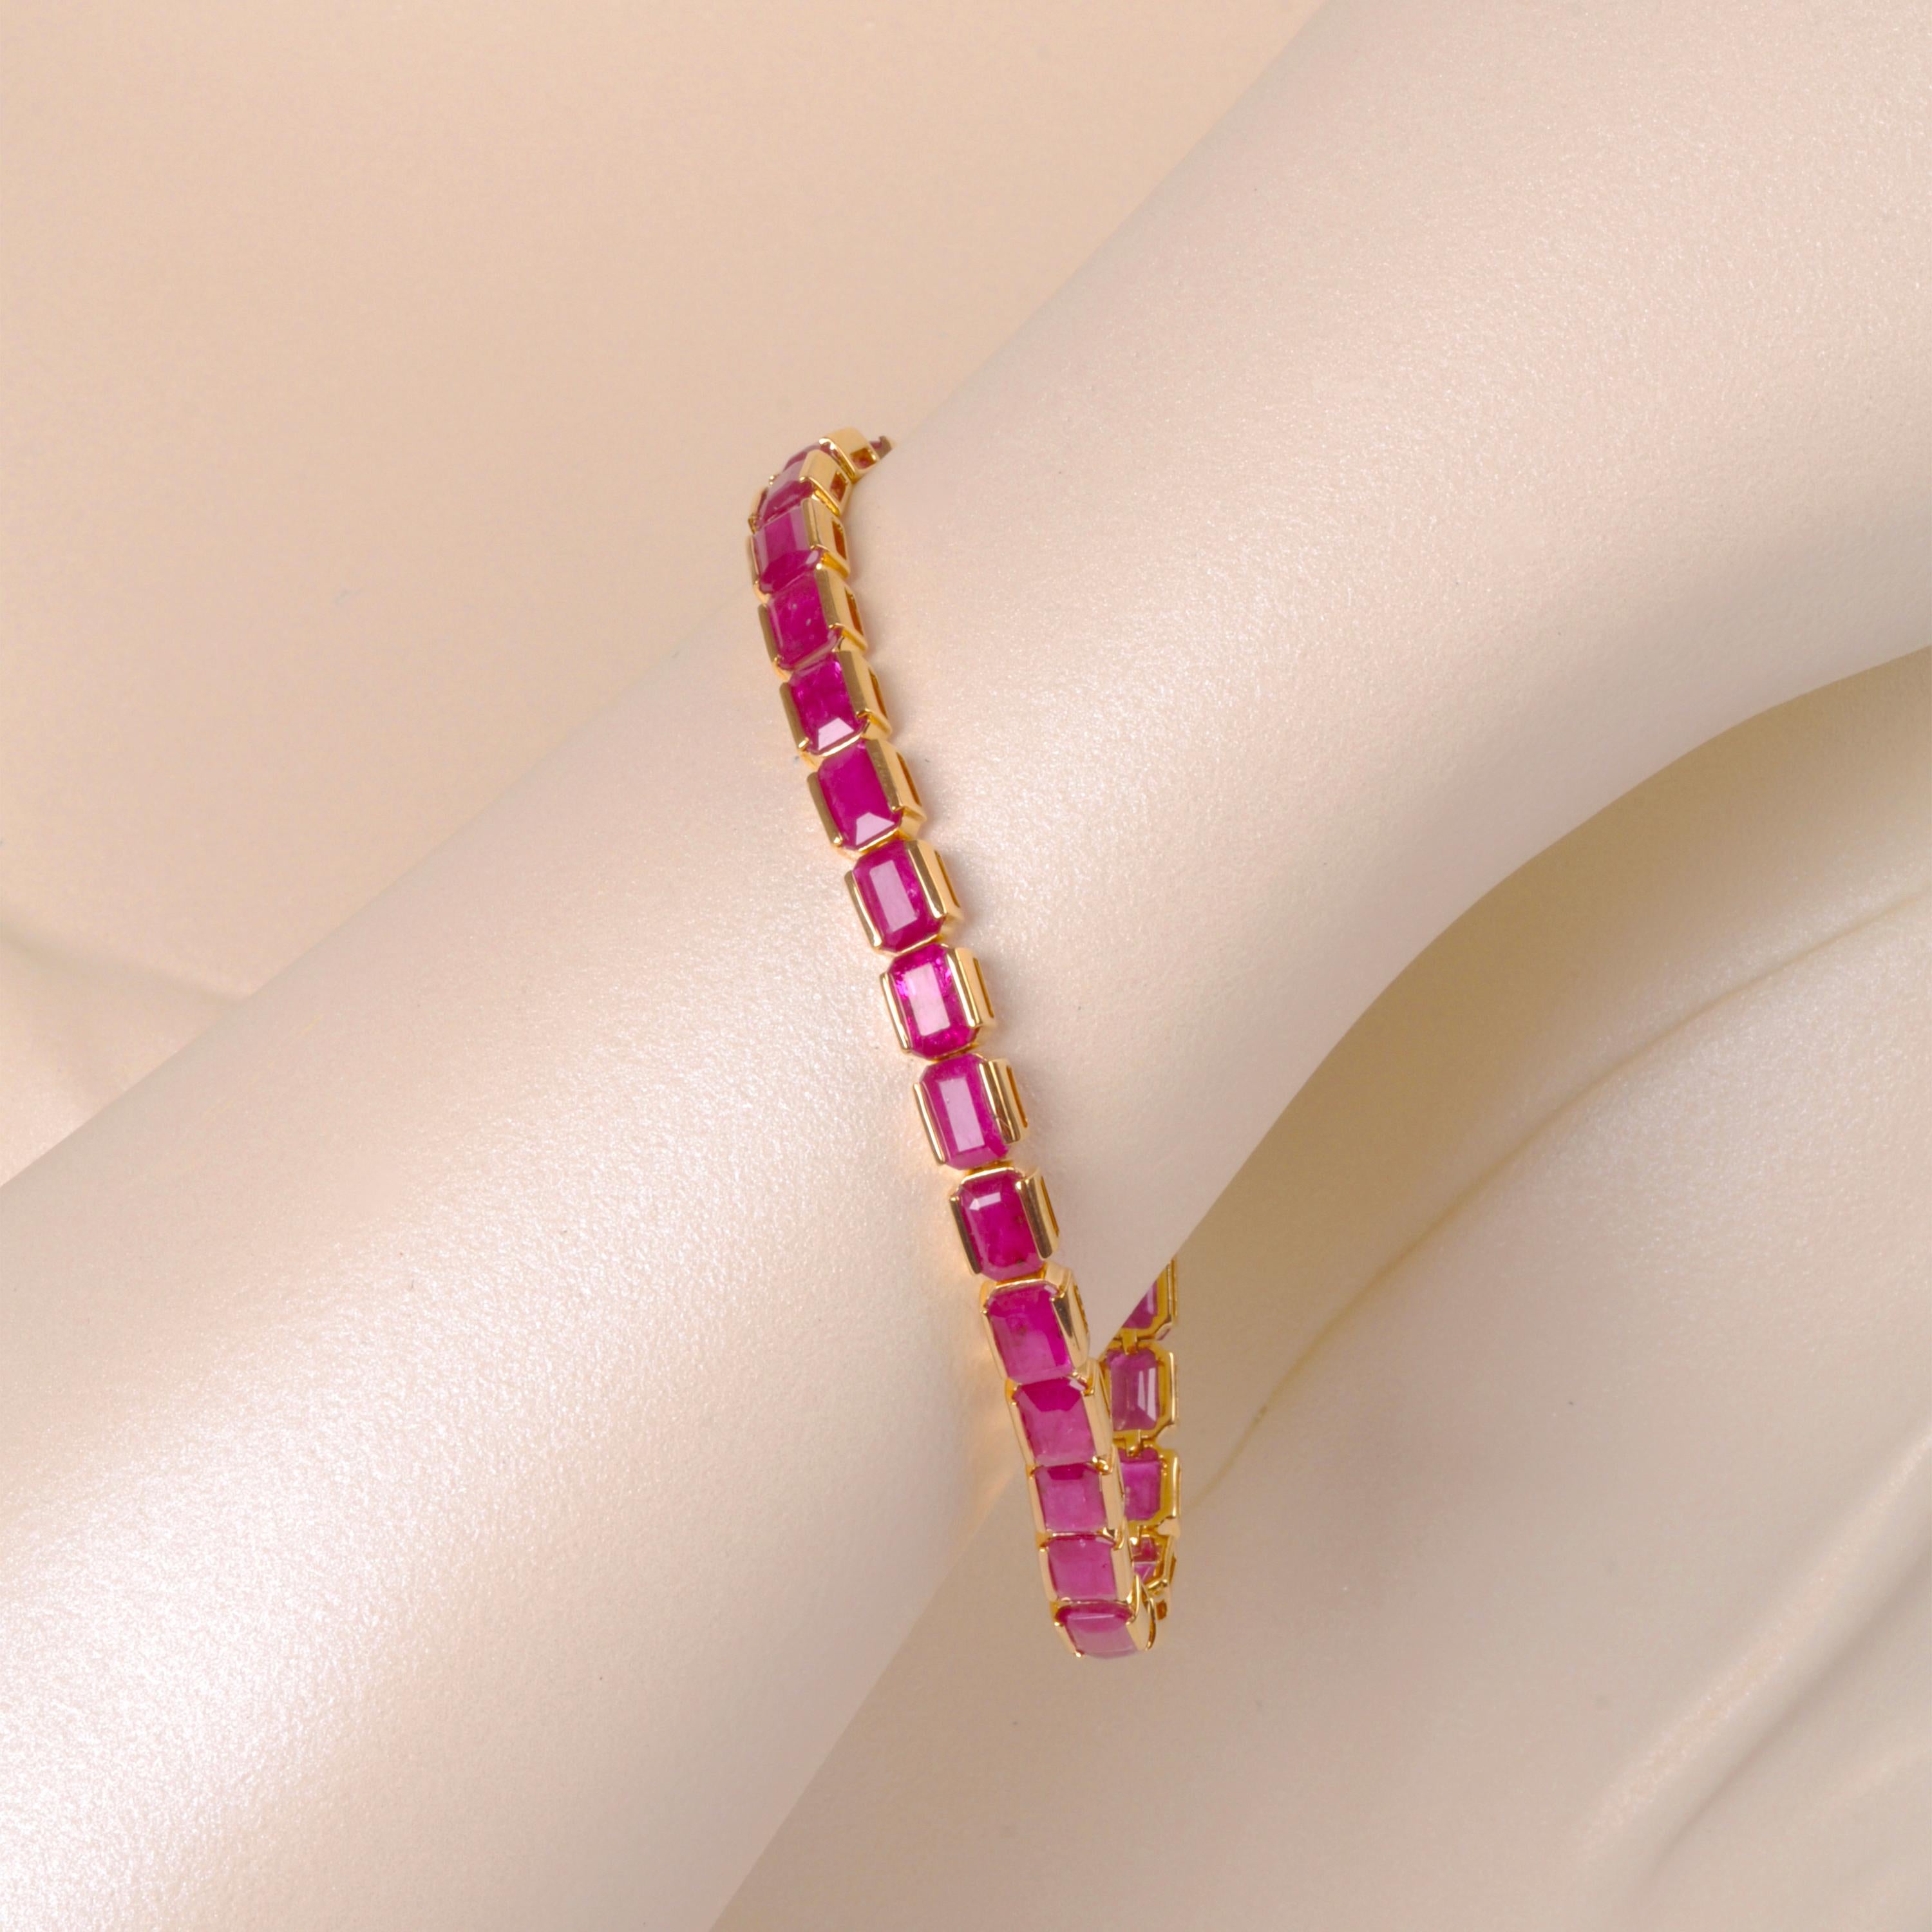 This deep and rich red ruby tennis bracelet features 28 identical octagon shaped rubies, each measuring 6x4mm and weighing a total of 16.65cts. The rubies are set in a half bezel setting, enhancing their exquisite beauty and creating an enchanting